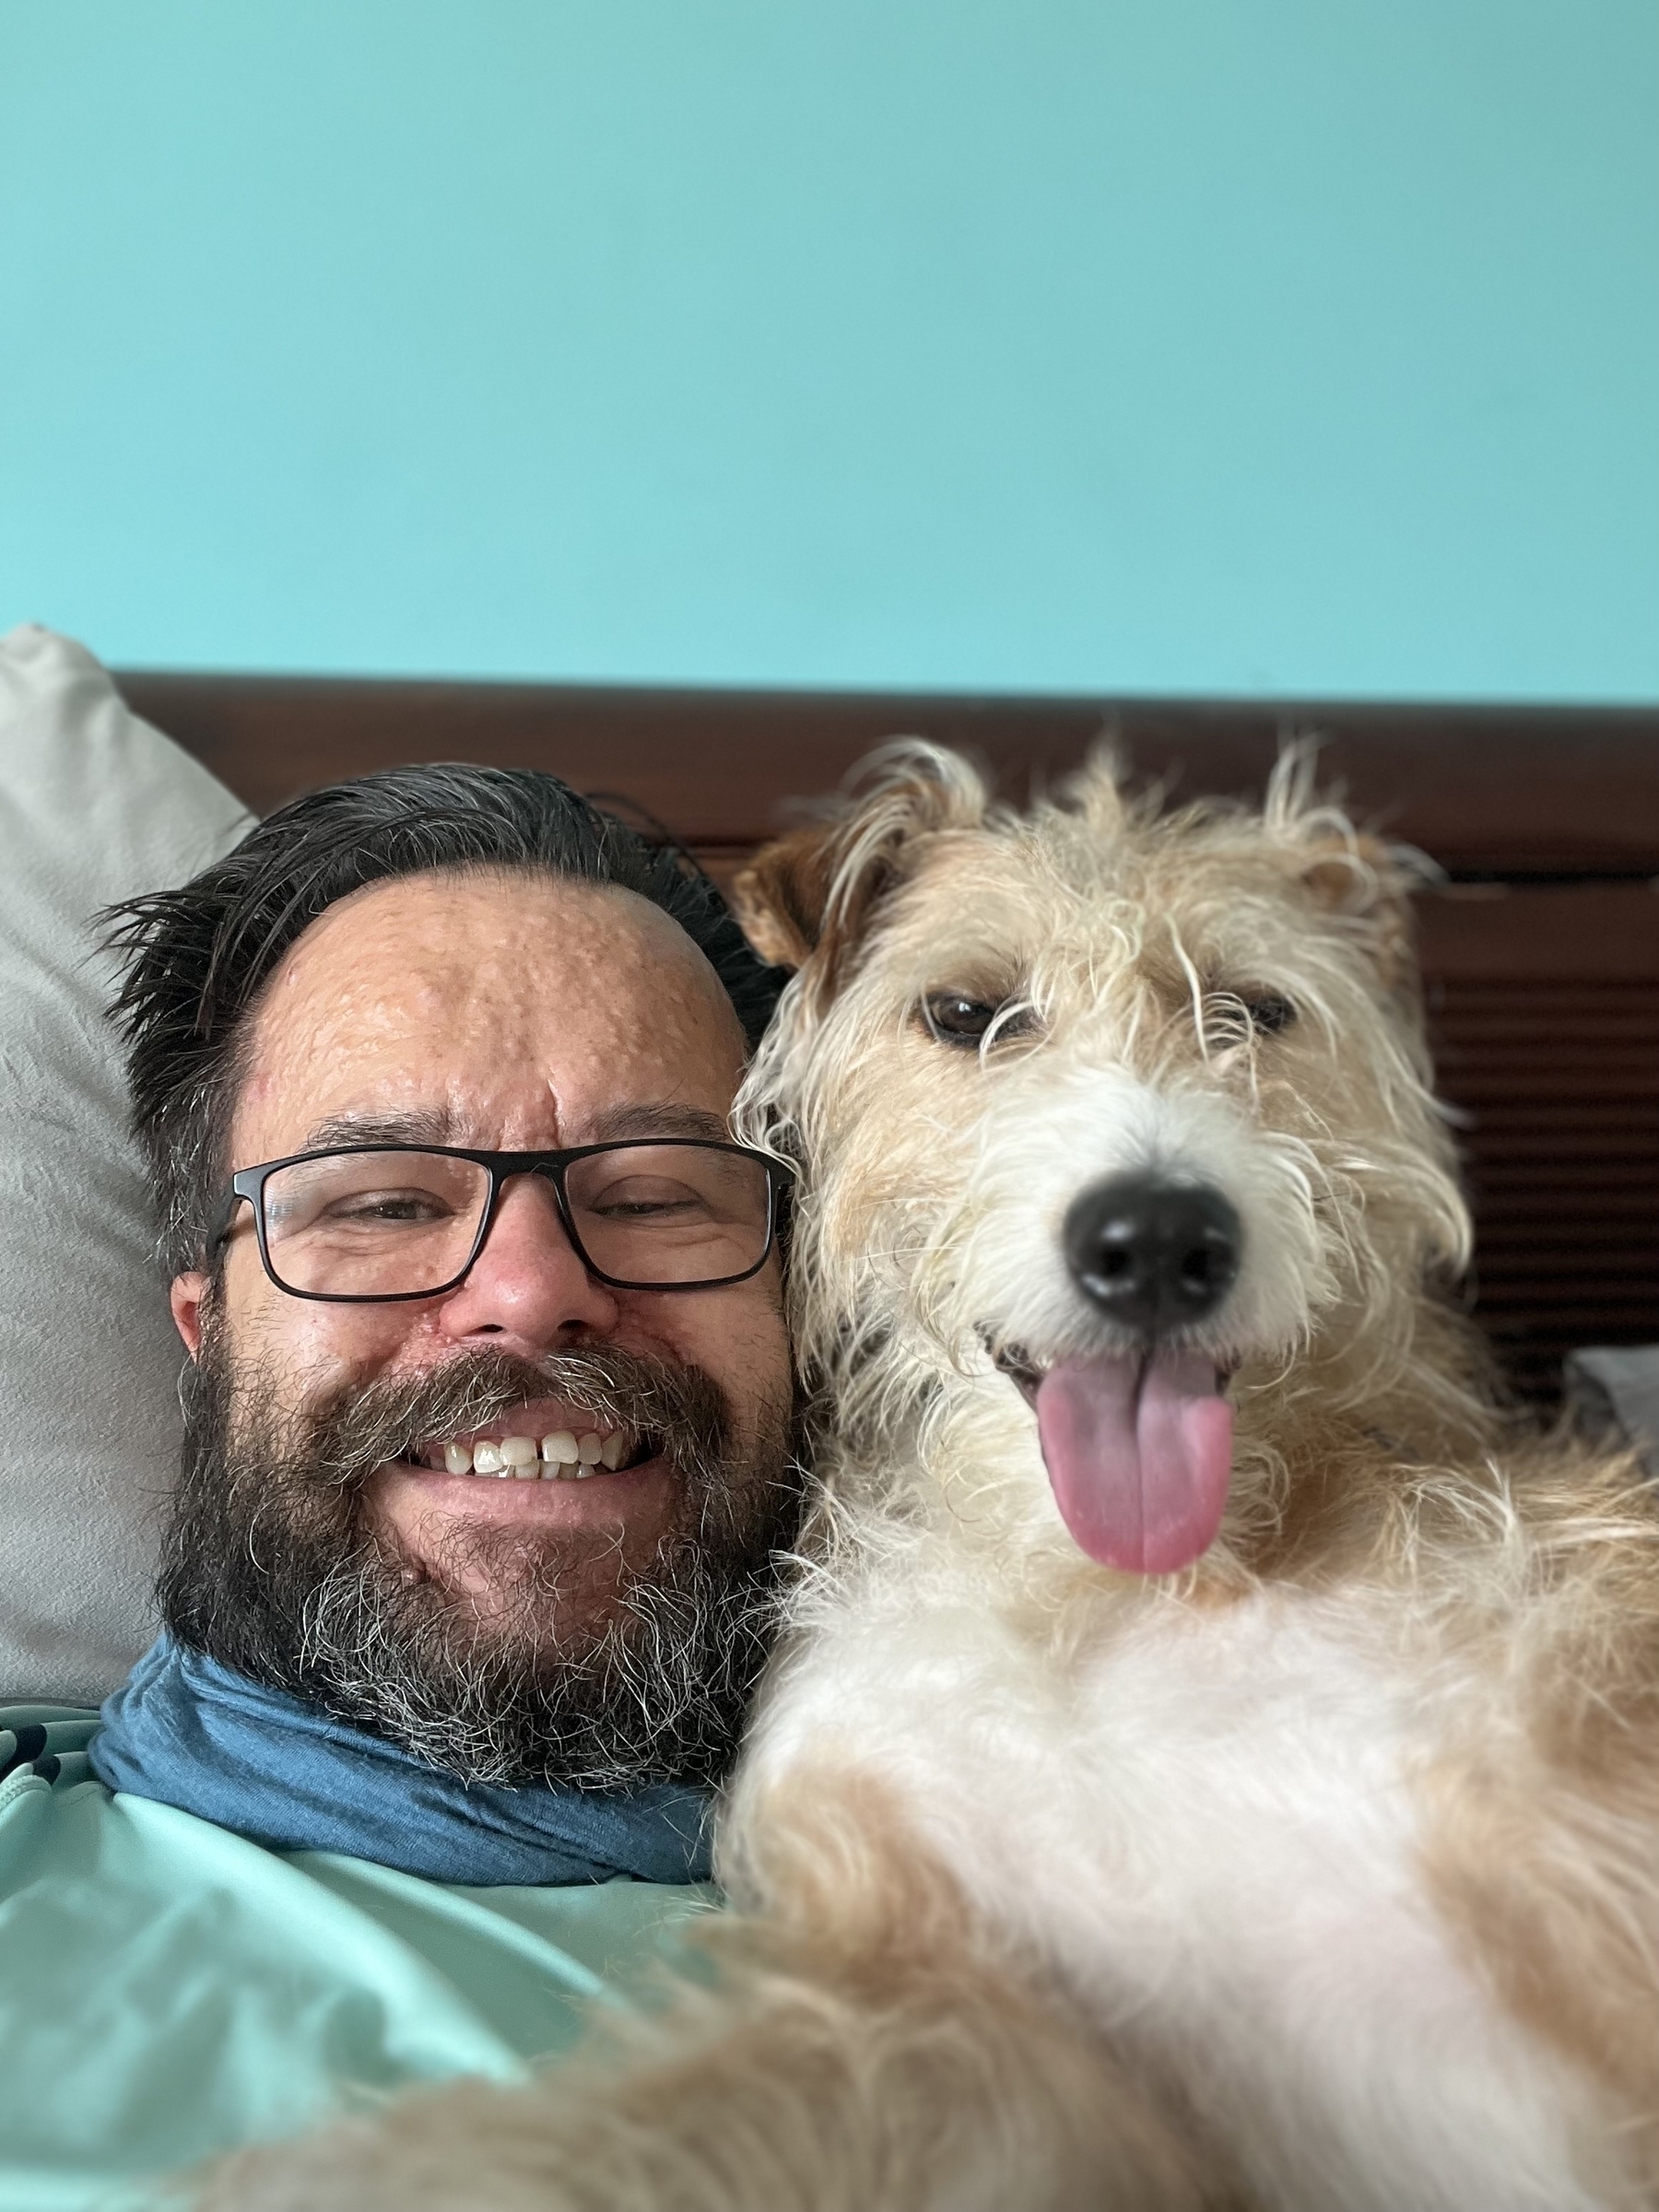 Beardy man with daft smile and daft dog with an even dafter expression. 